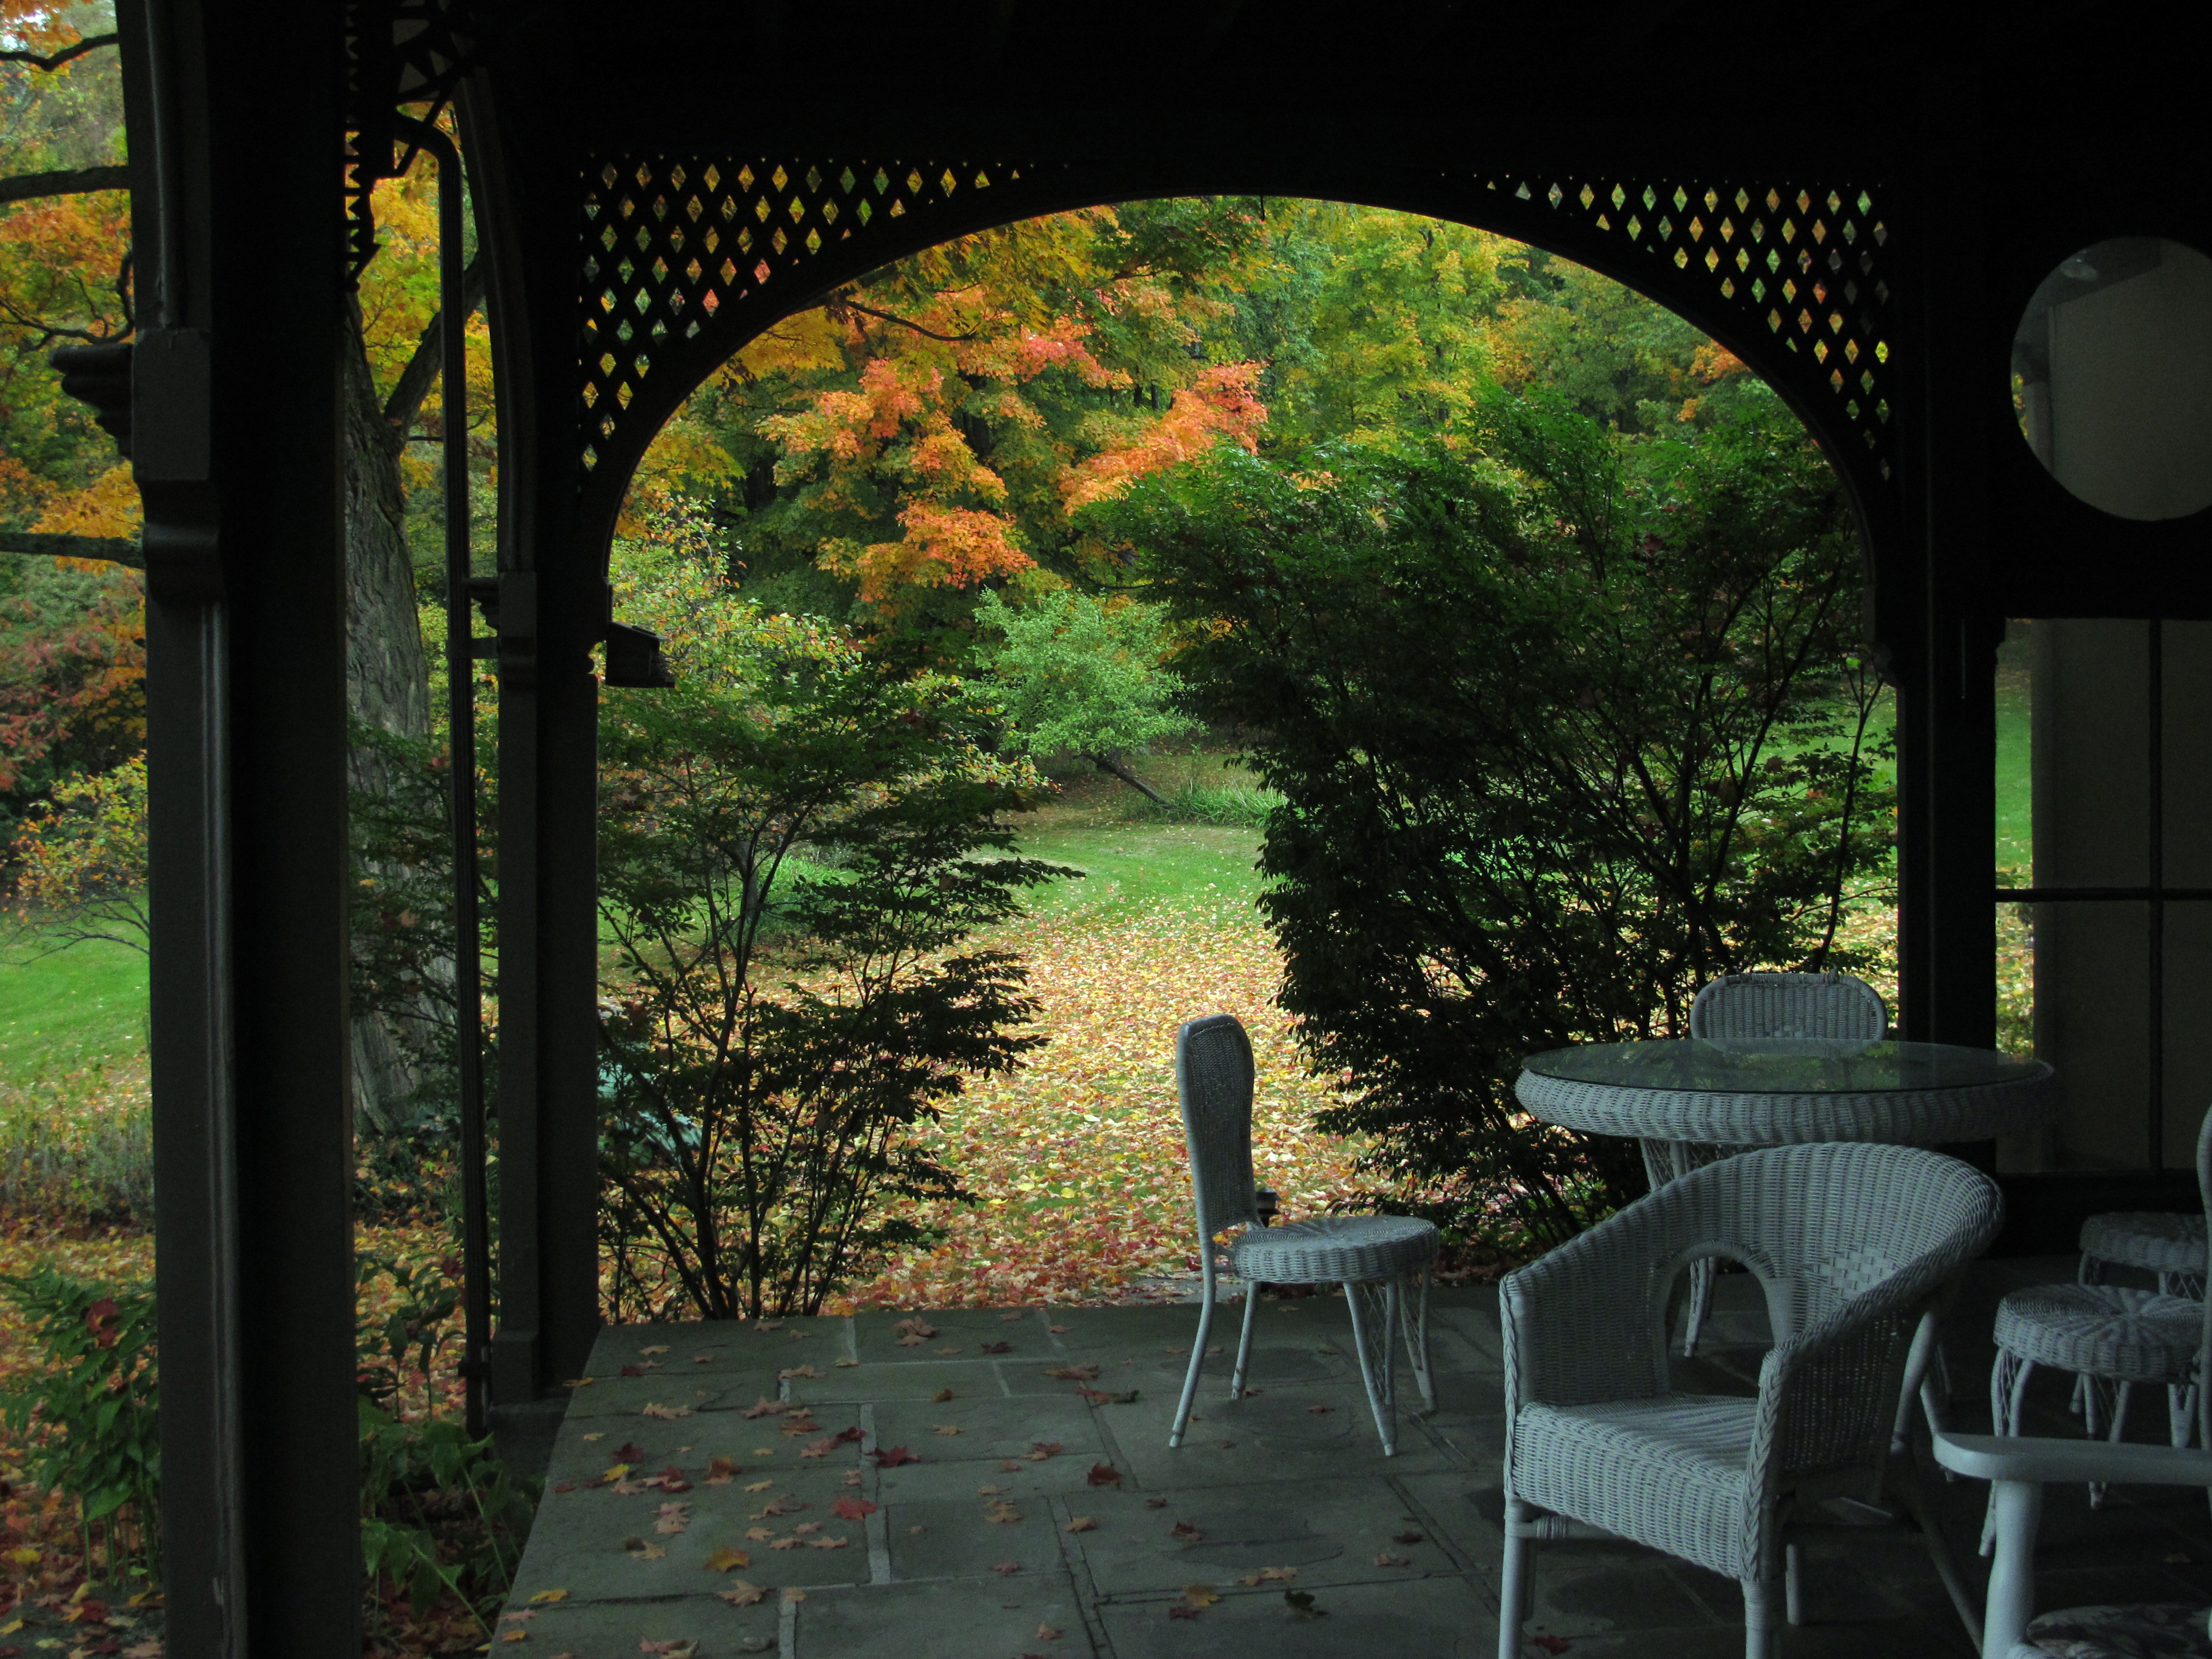 Autumn view from the porch